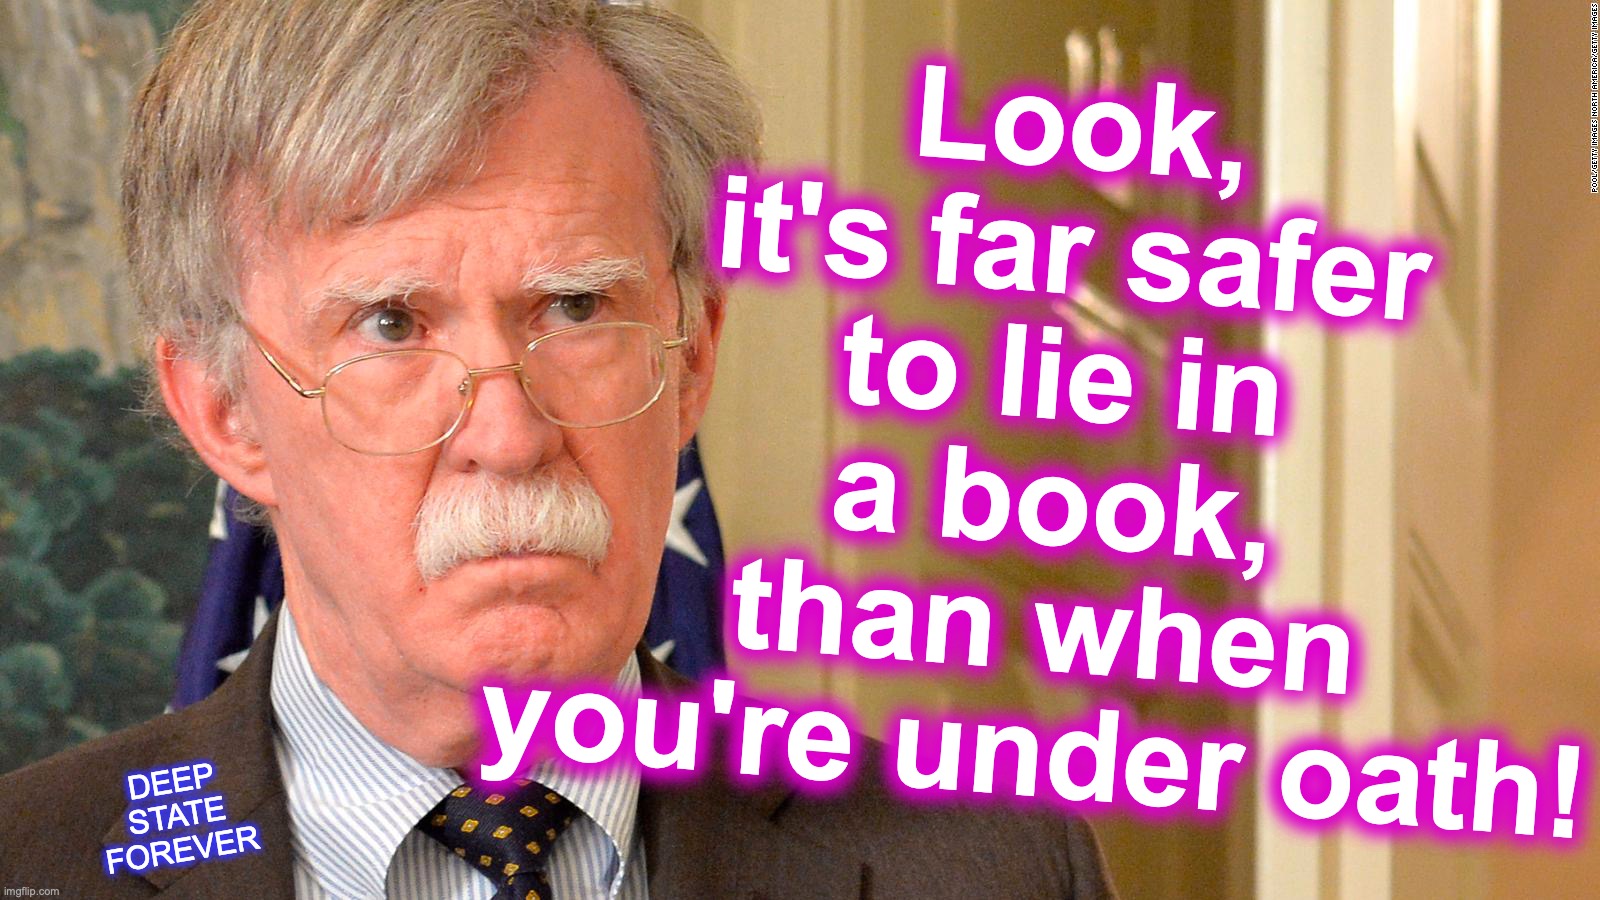 john bolton motto | Look, it's far safer to lie in a book, than when you're under oath! DEEP STATE FOREVER | image tagged in deep state,swamp,establishment | made w/ Imgflip meme maker